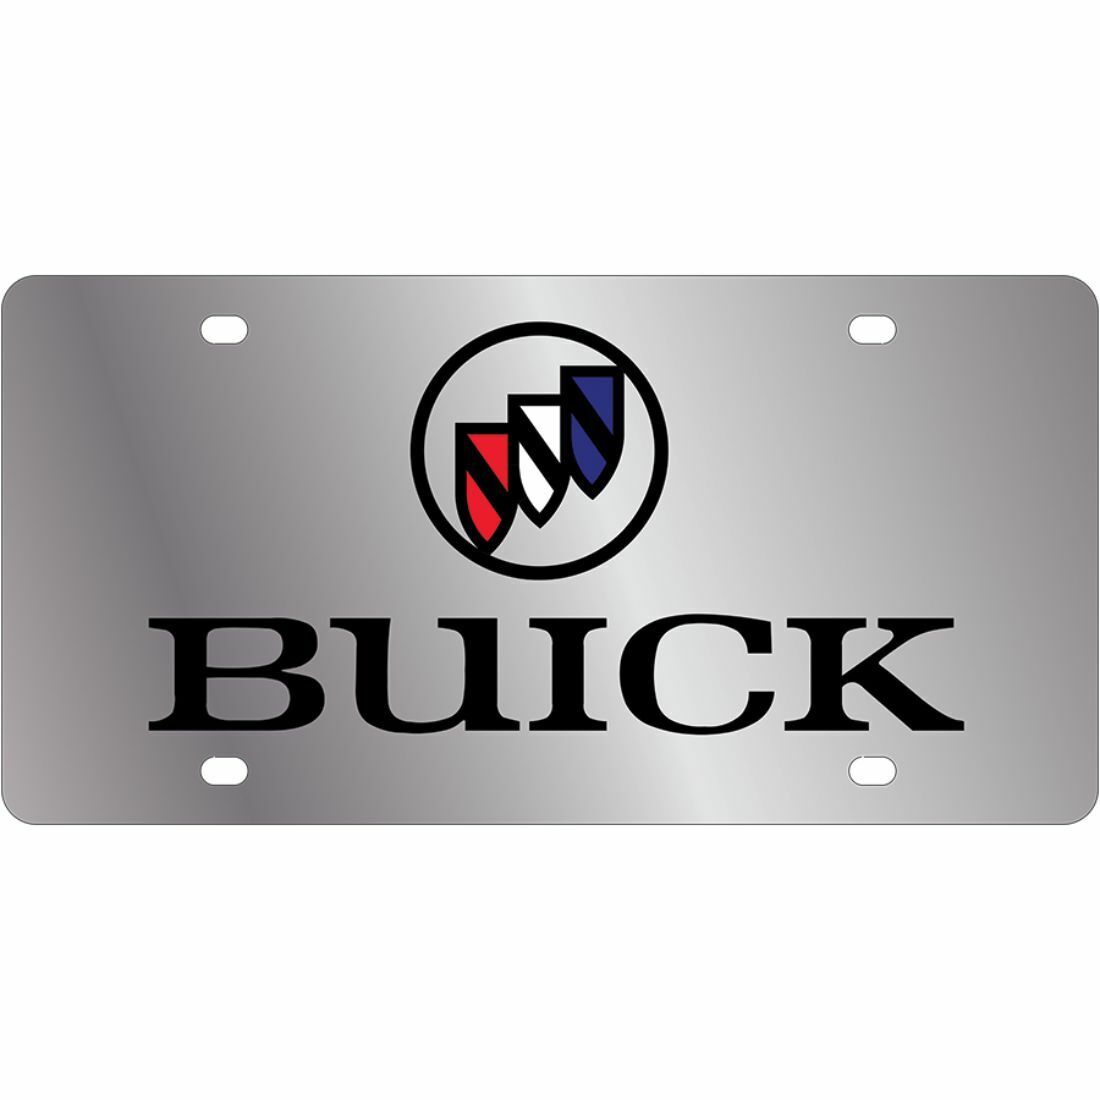 Stainless Steel Plate Buick License Plate Frame 3D Novelty - Official Licensed